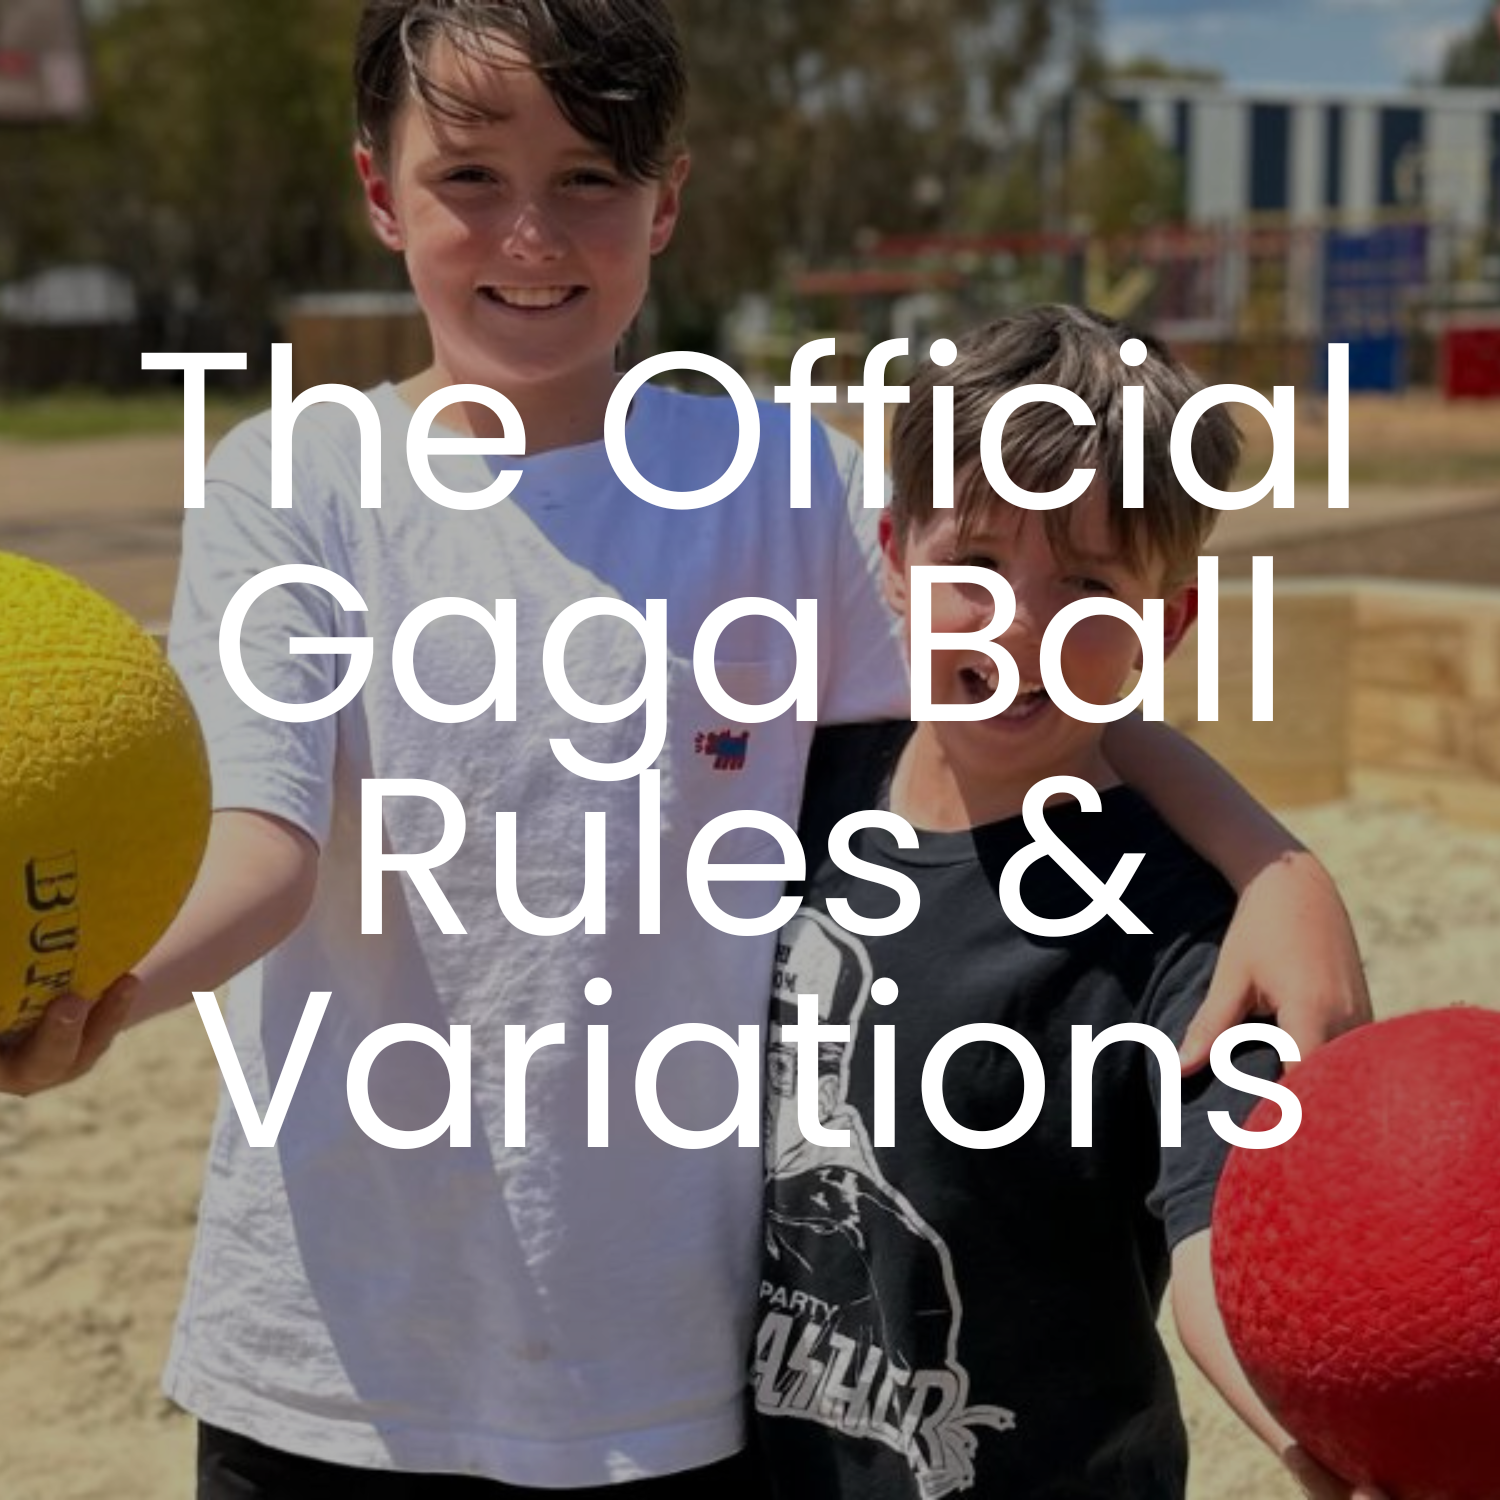 Image with 2 boys holding gaga balls in a gaga ball pit. Text over the image saying 'The Official Gaga Ball Rules & Variations'